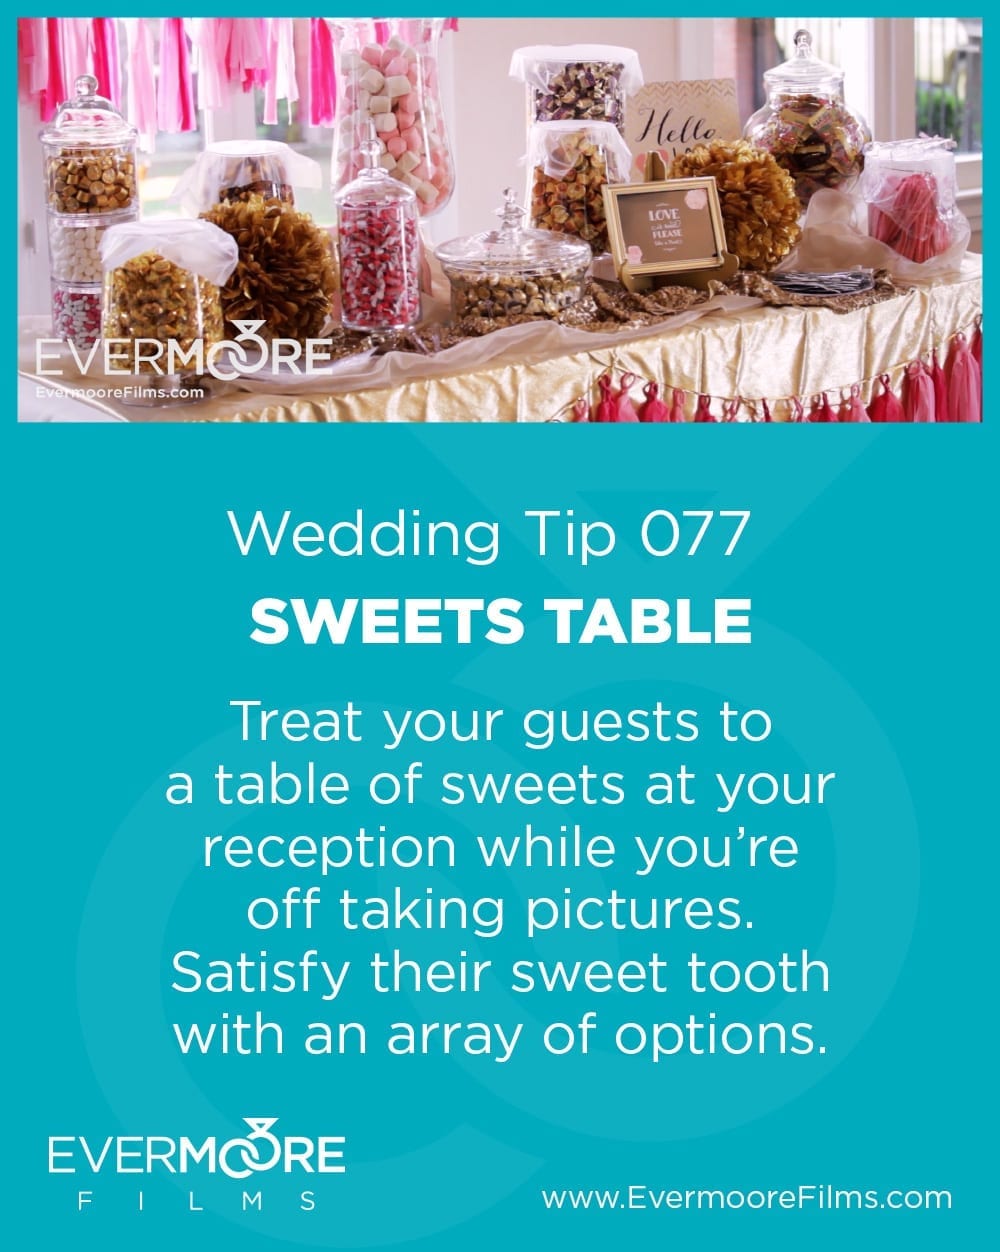 Wedding Guests always love a good sweets table! | www.EvermooreFilms.com